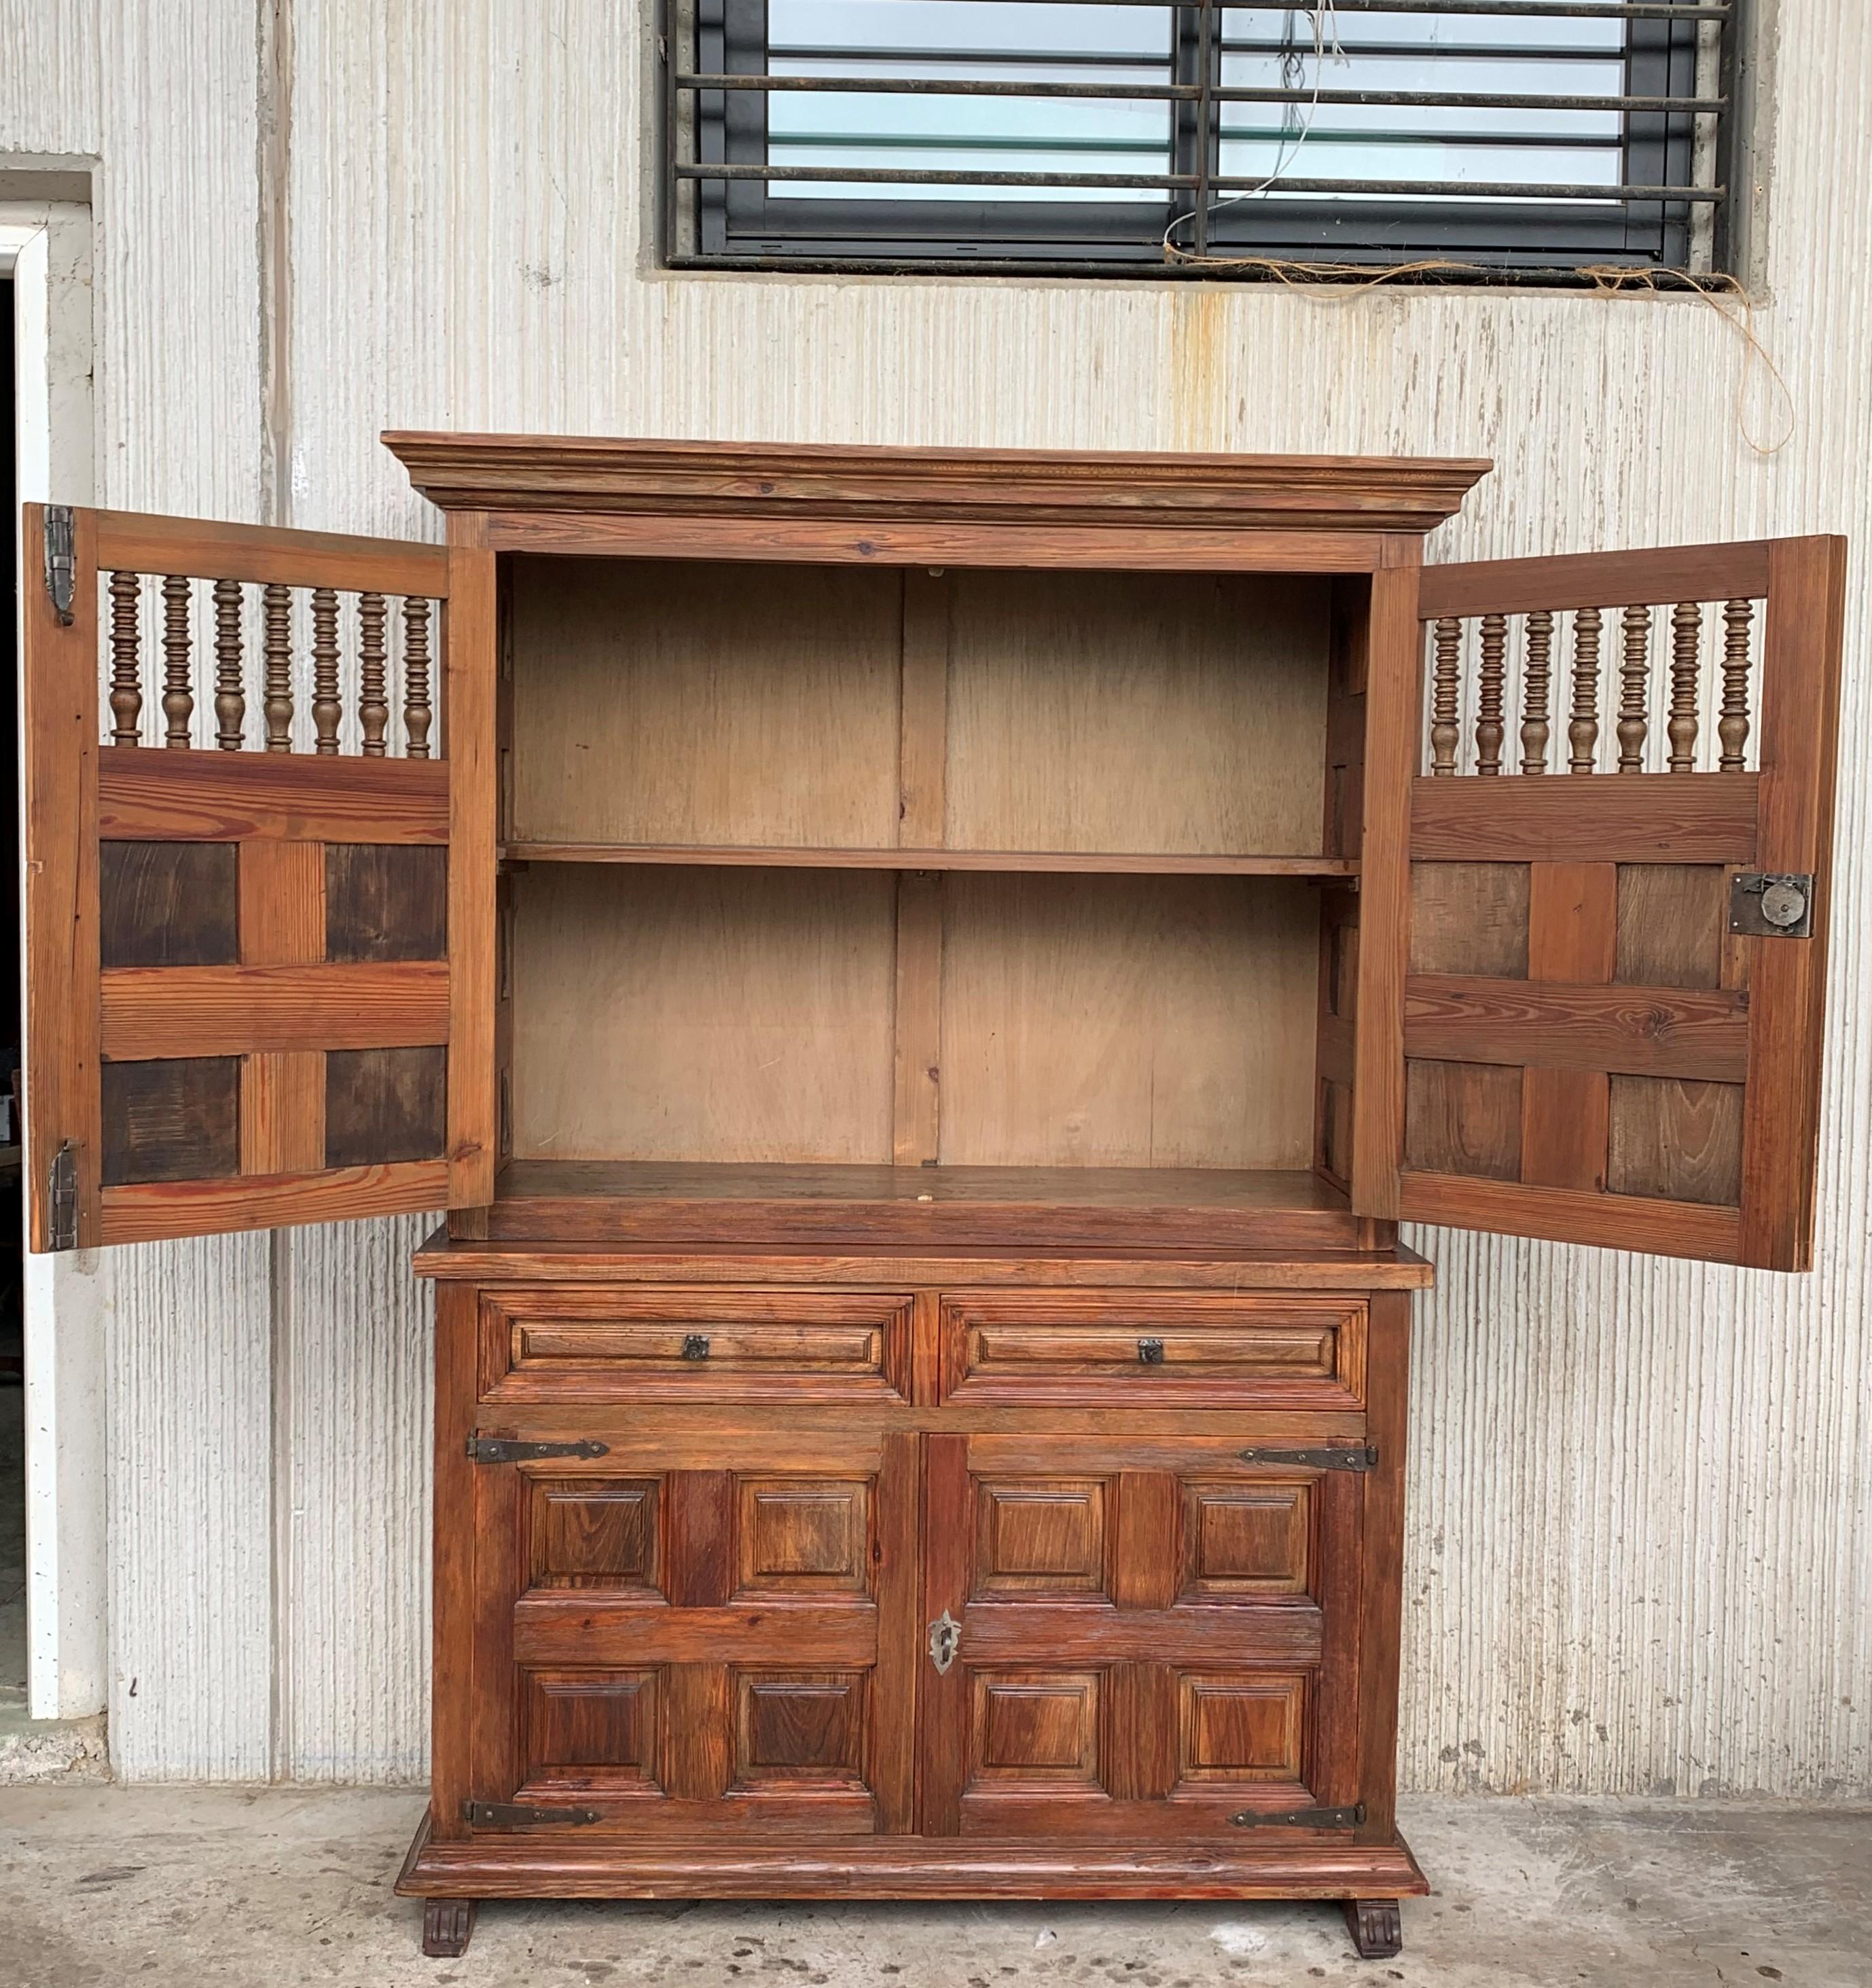 Grand 20th century Spanish cabinet constructed from pine. Features a coffered case fronted by two doors in the high part and two doors in the low part. This massive cabinet made in Spain features beautiful walnut grain and showcases the amazing